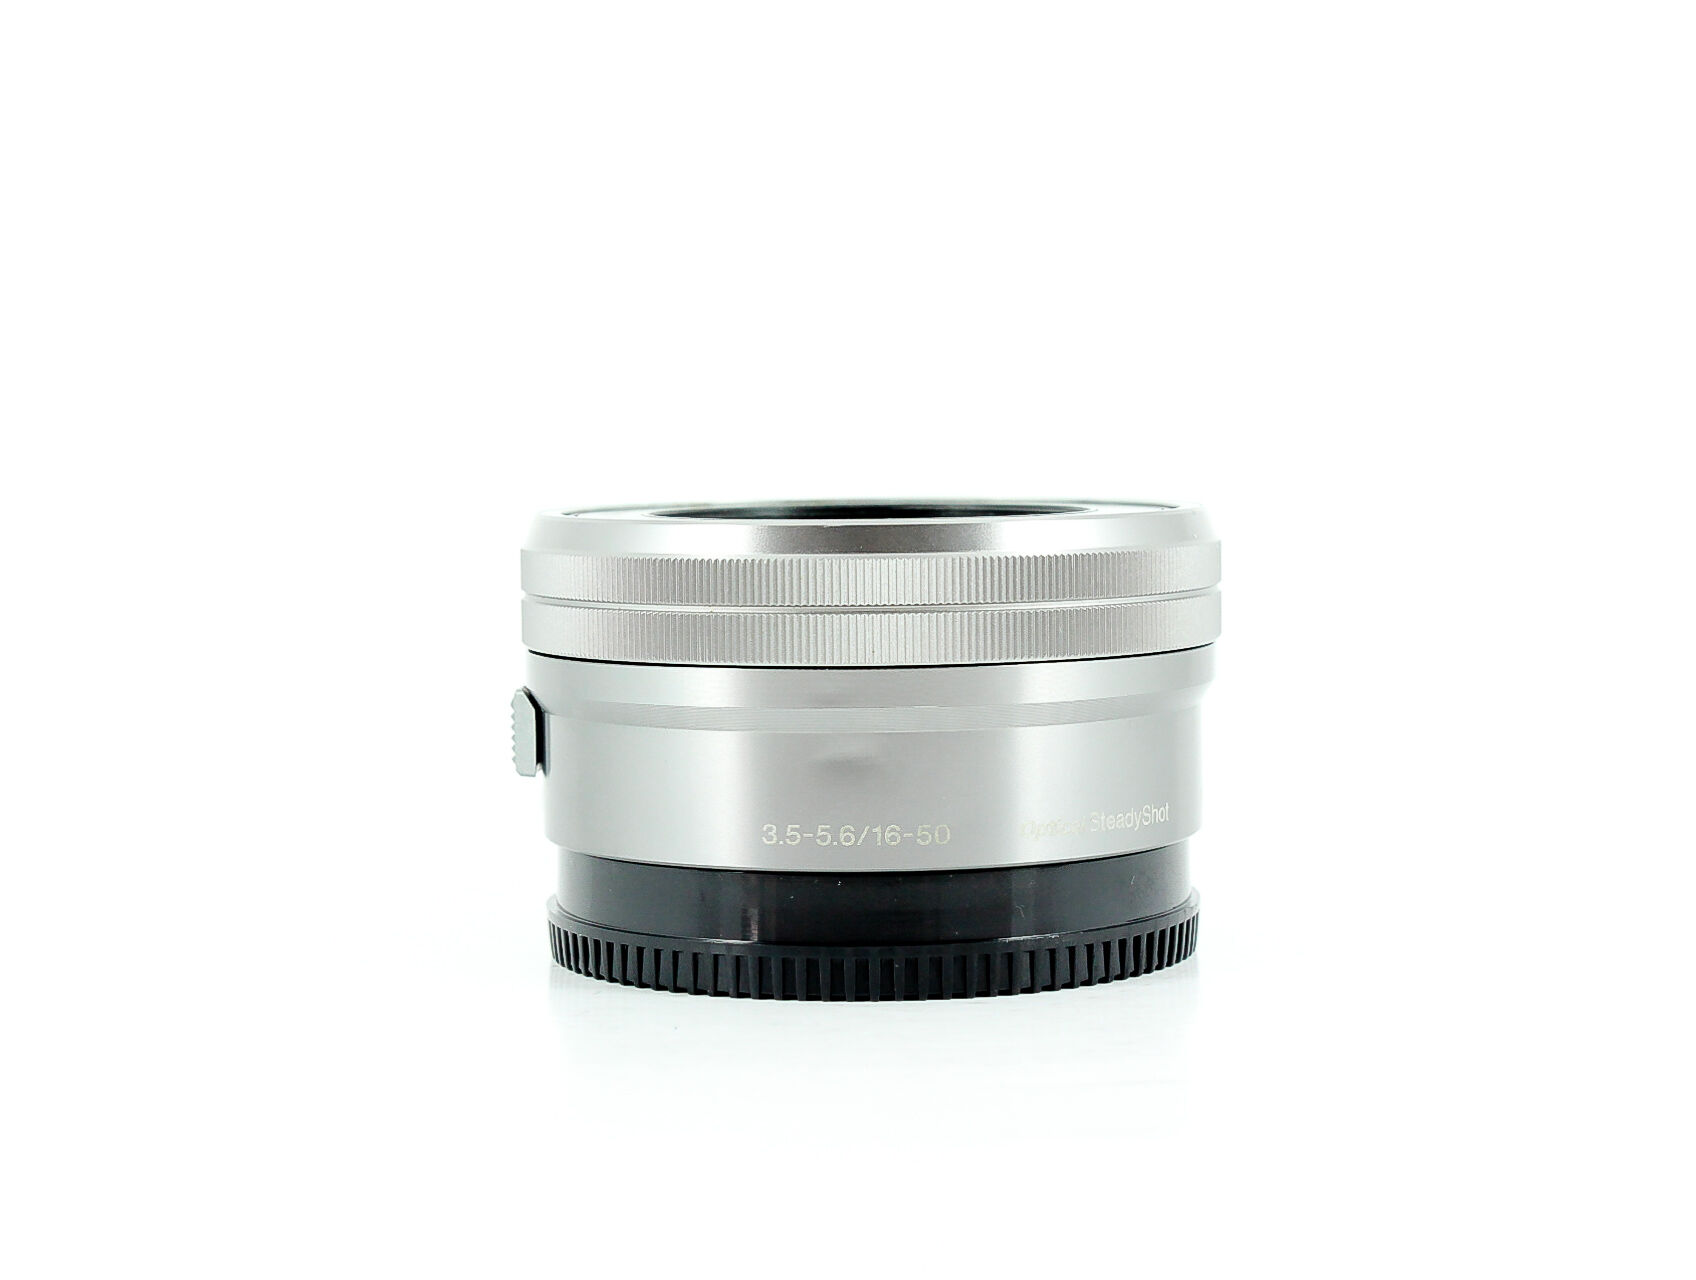 Sony E PZ 16-50mm f/3.5-5.6 OSS (Condition: Good)